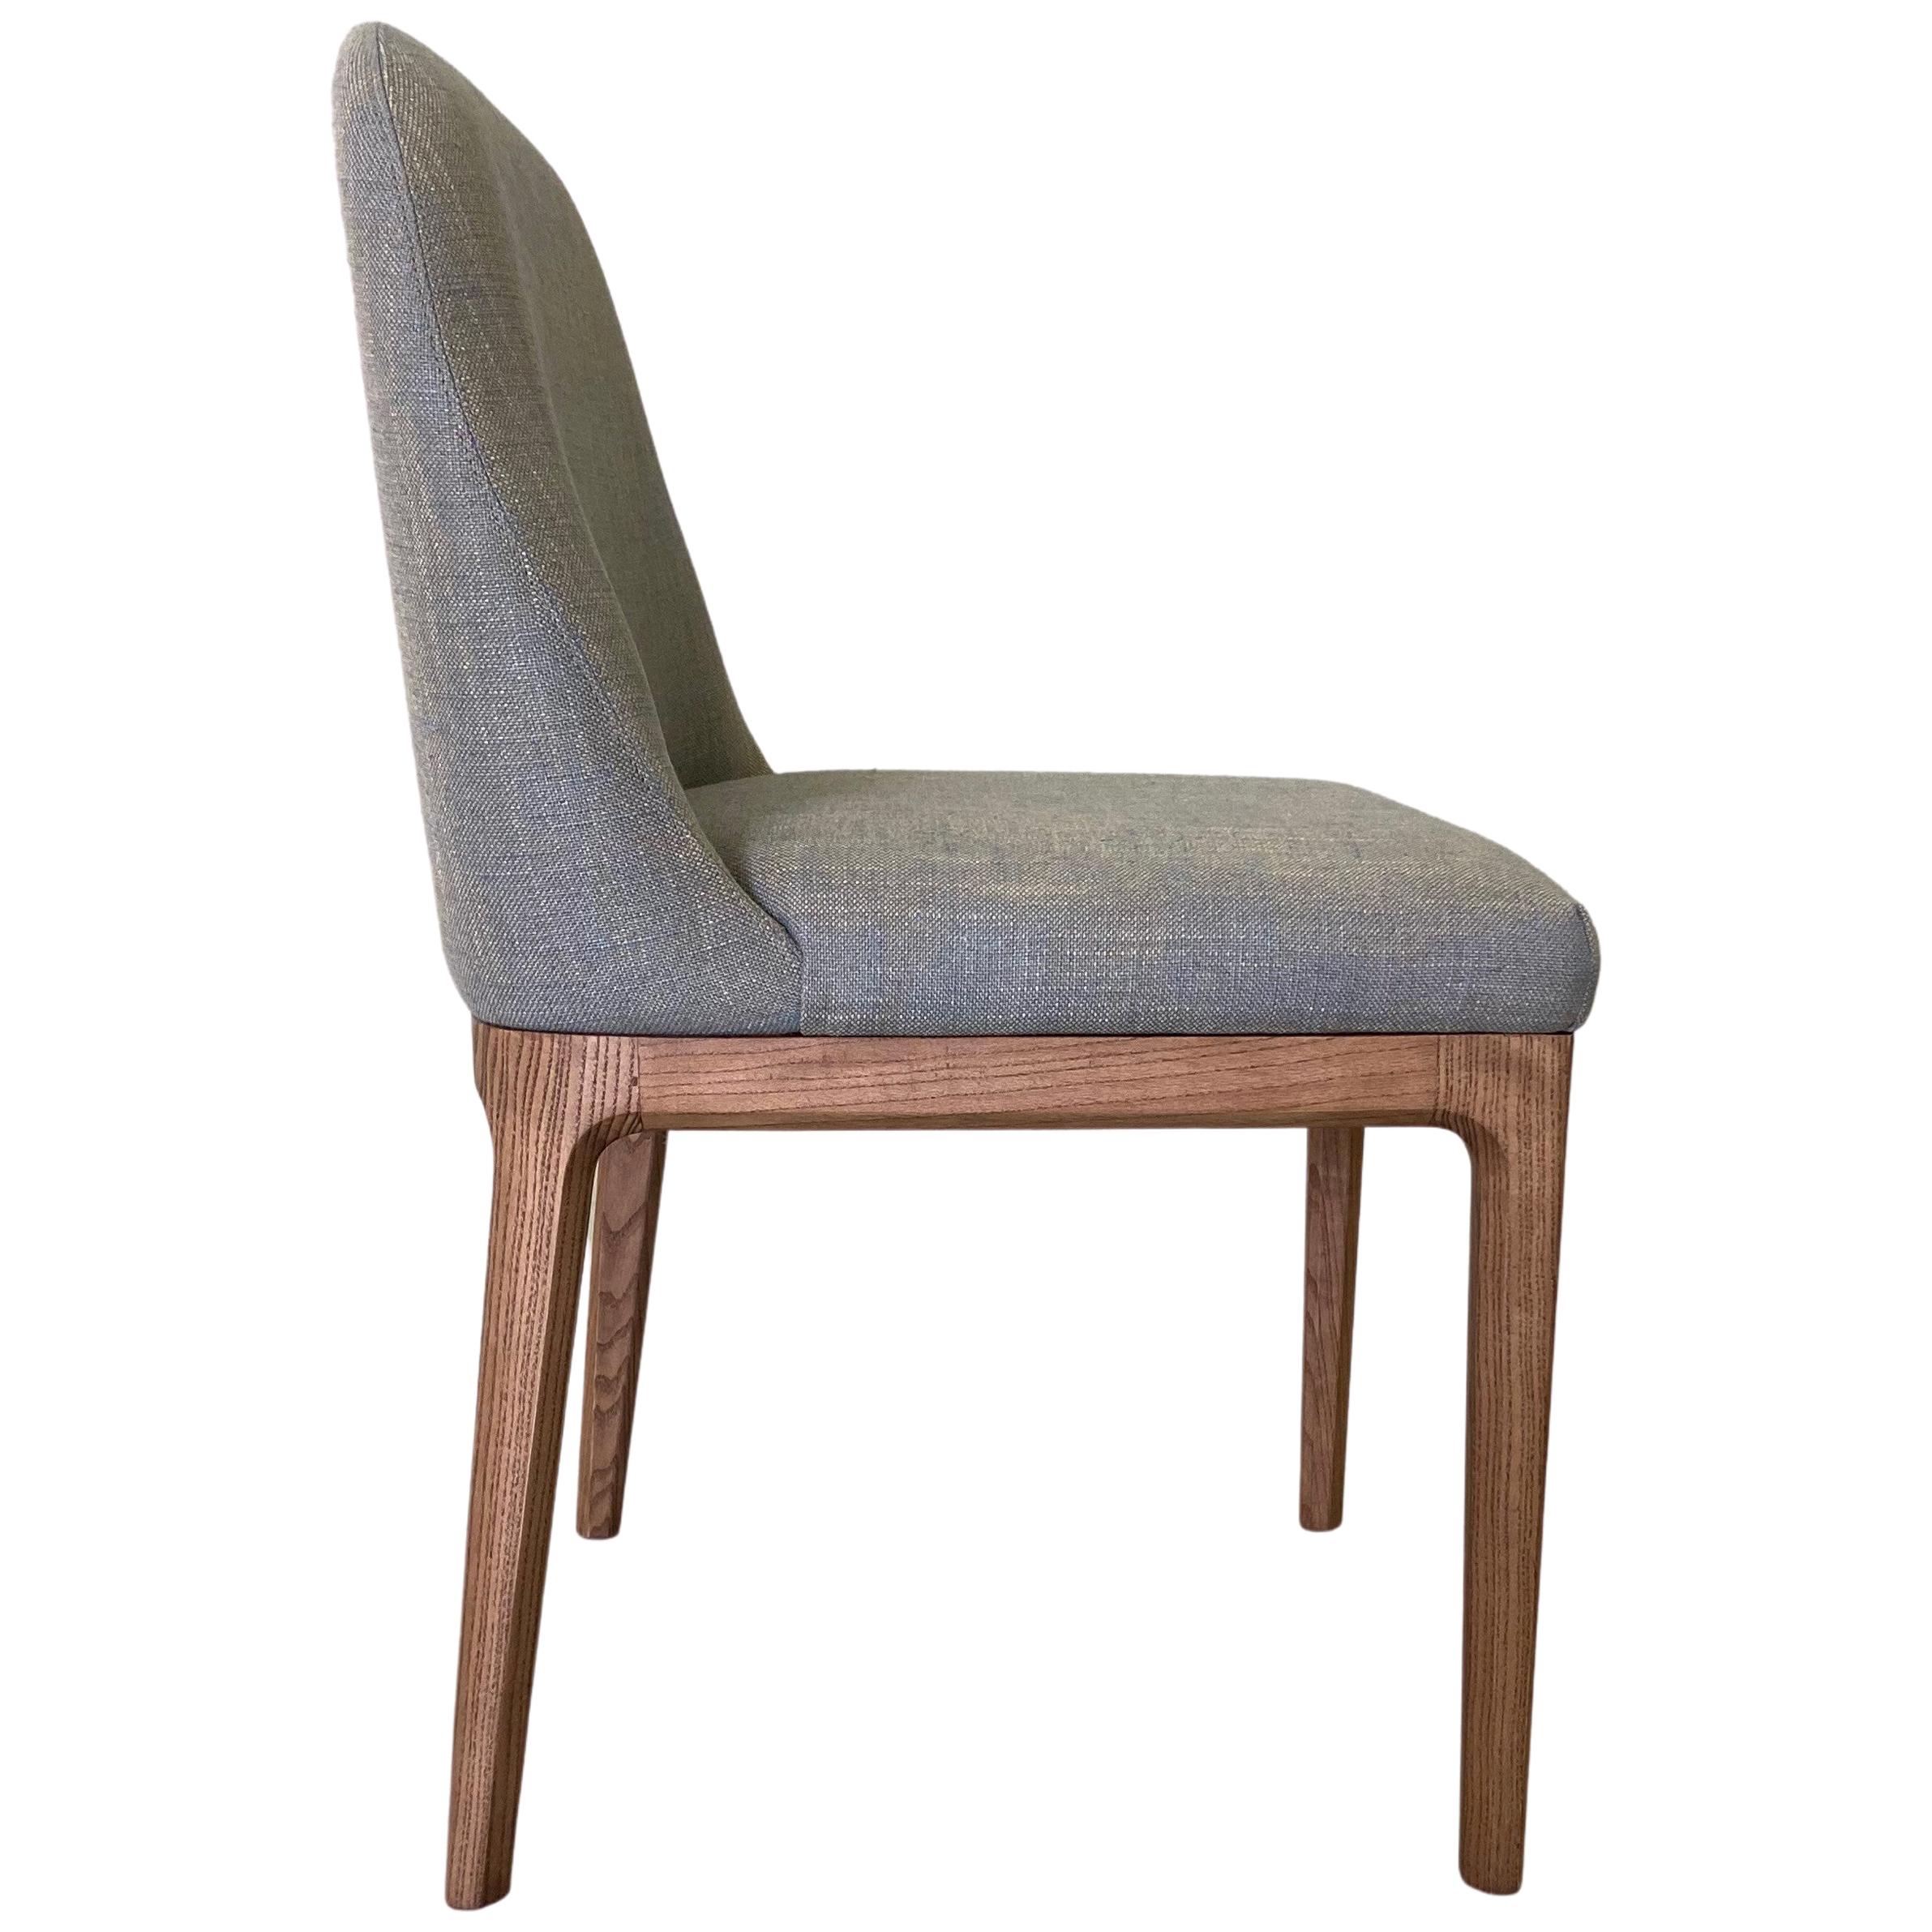 Morelato Contemporary Dining Chair in Ashwood